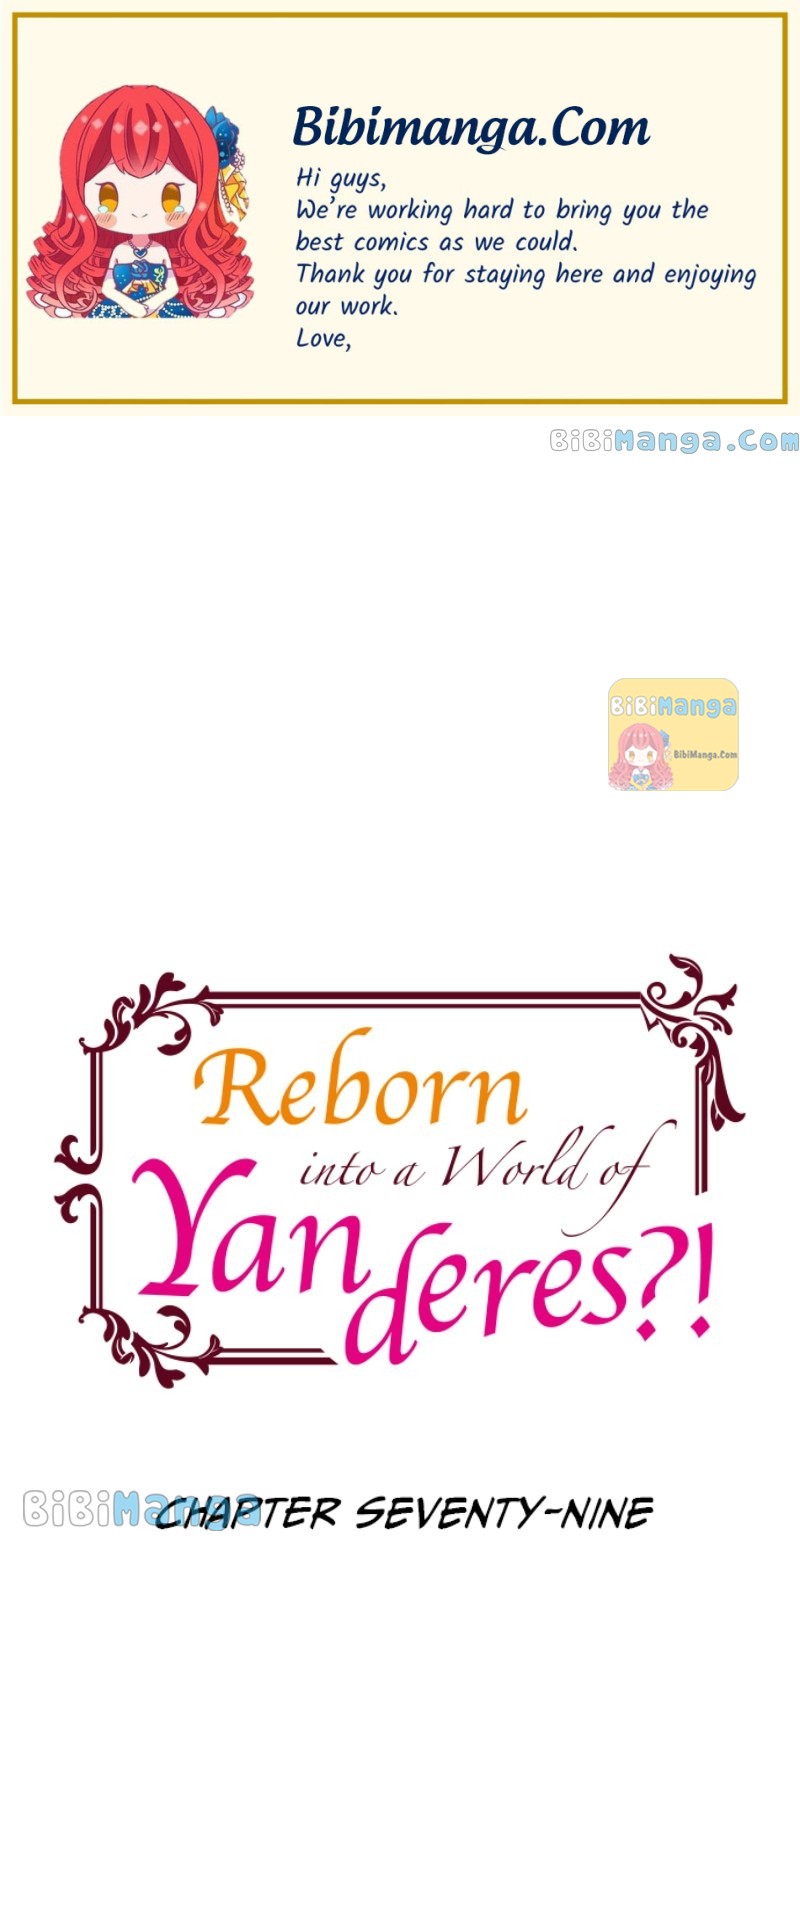 Reborn into a World of Yanderes?! chapter 79